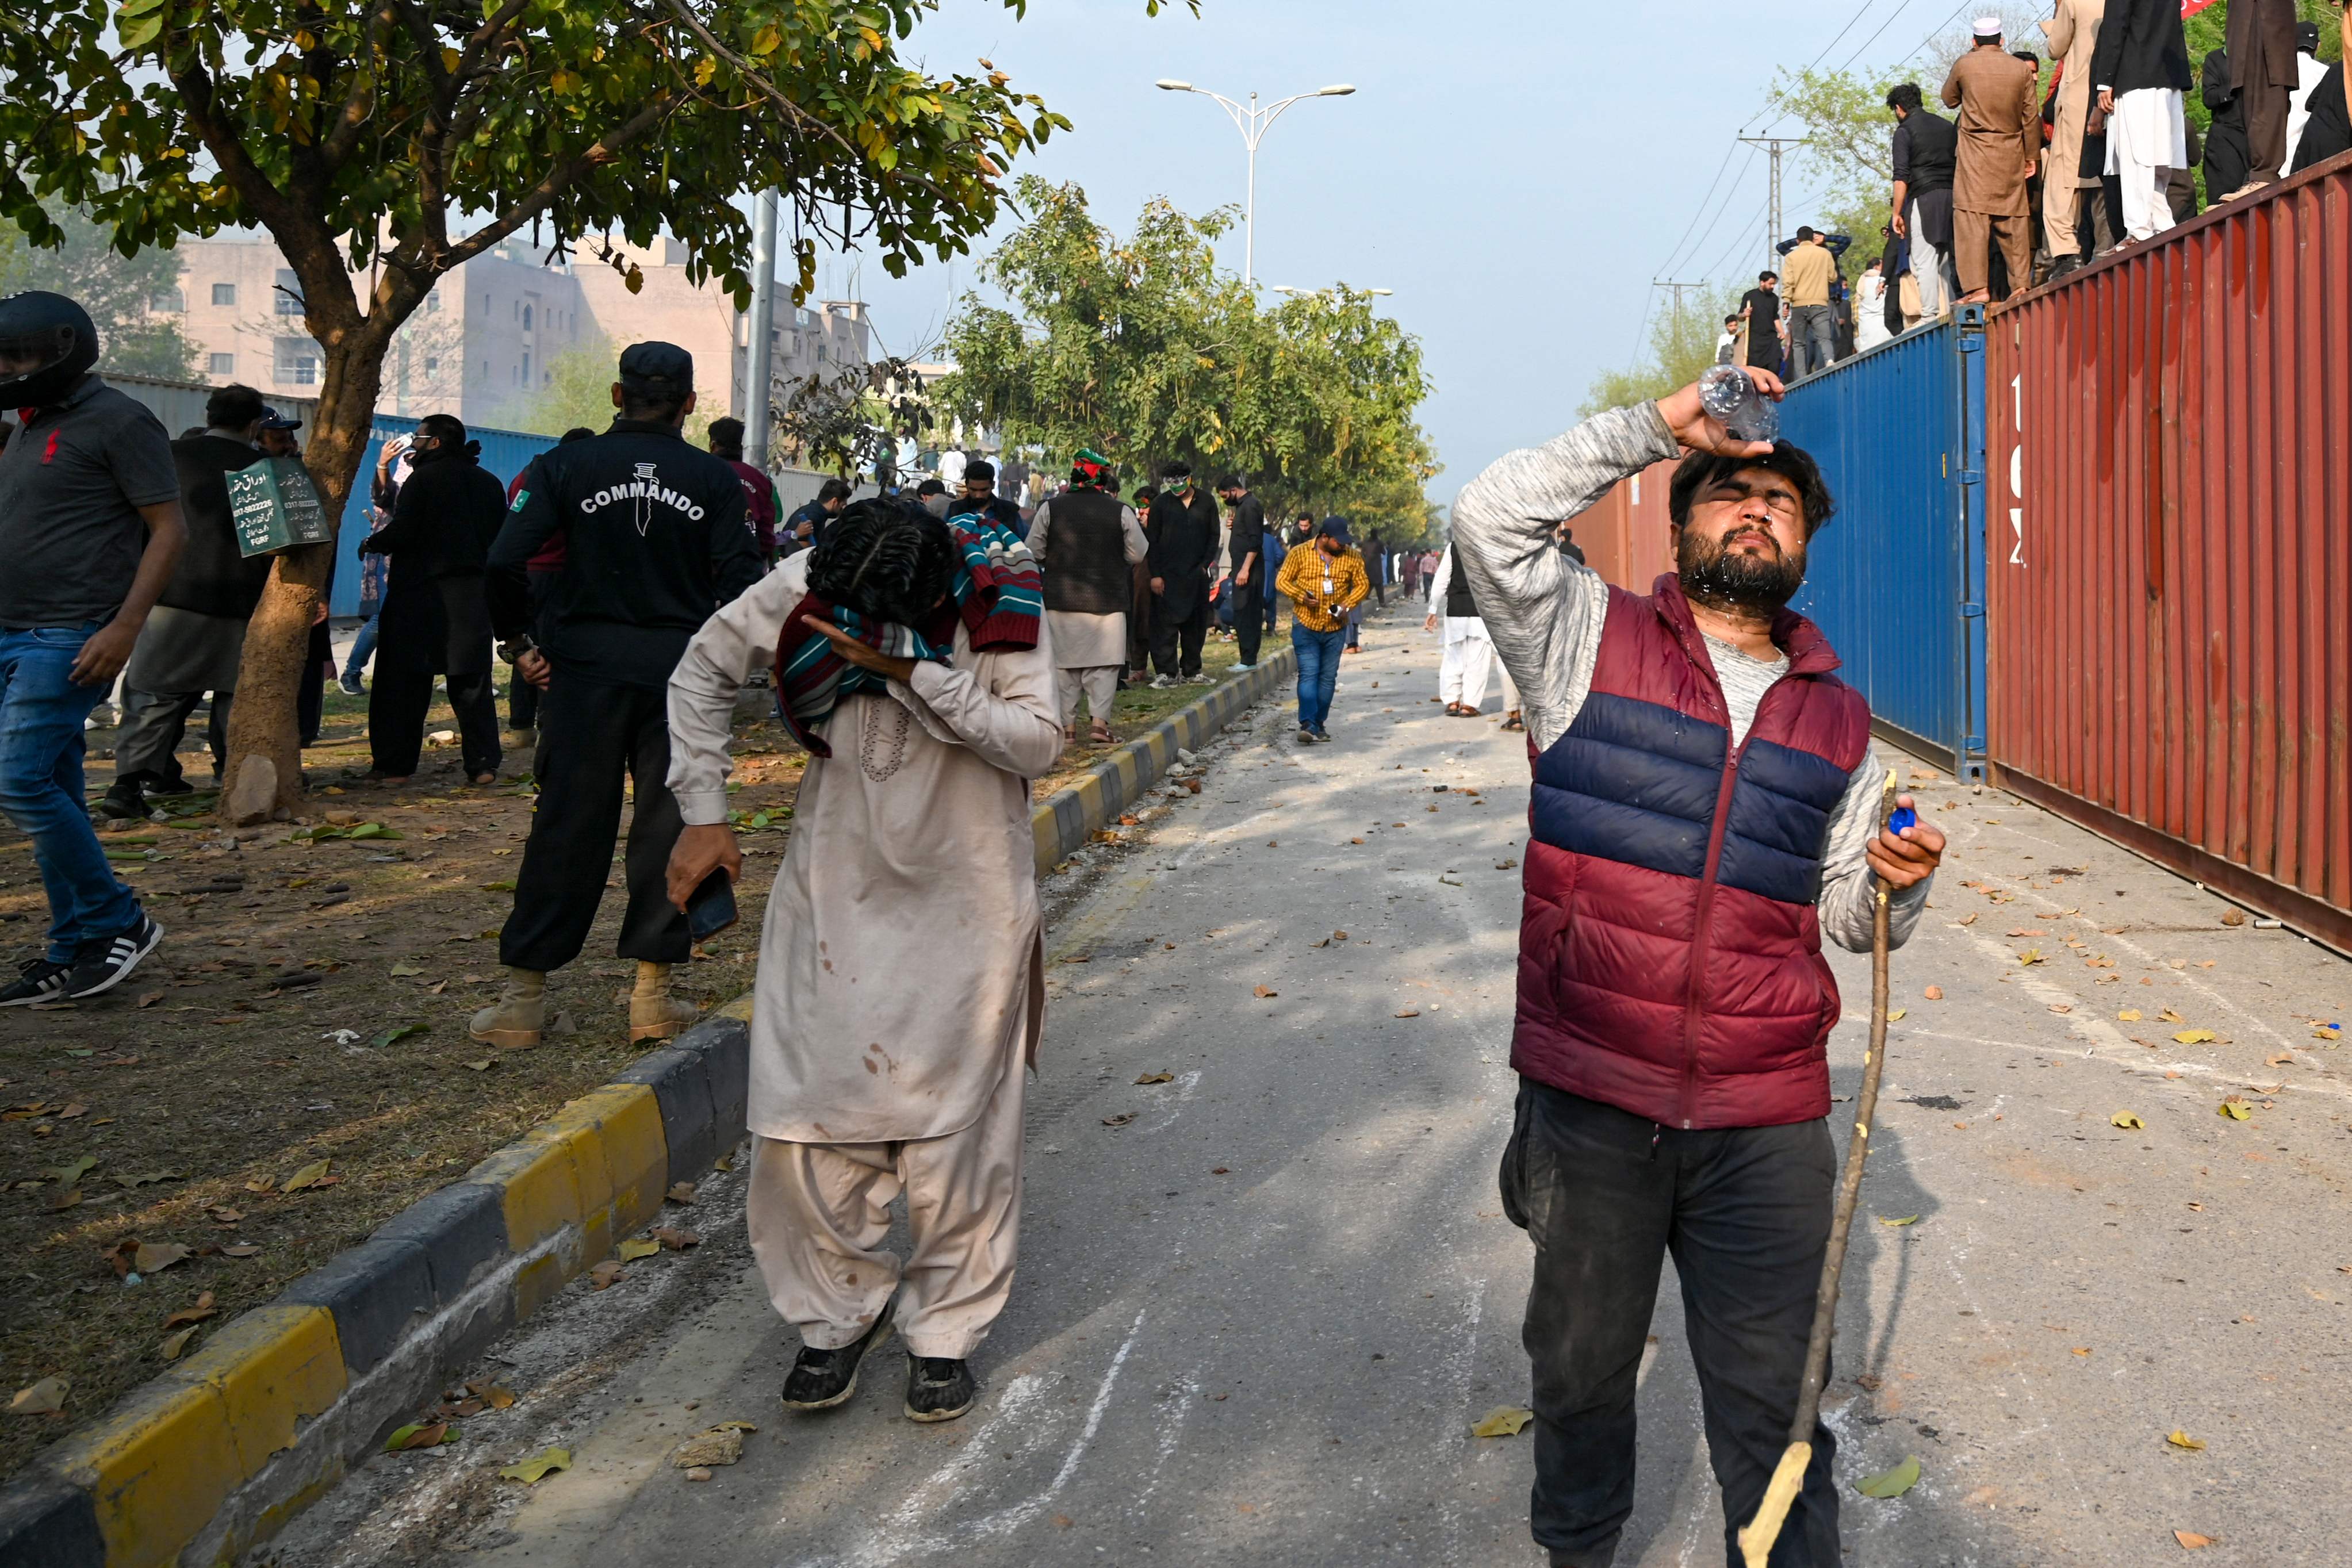 The police also used tear gas to disperse the activists — Photo: AFP